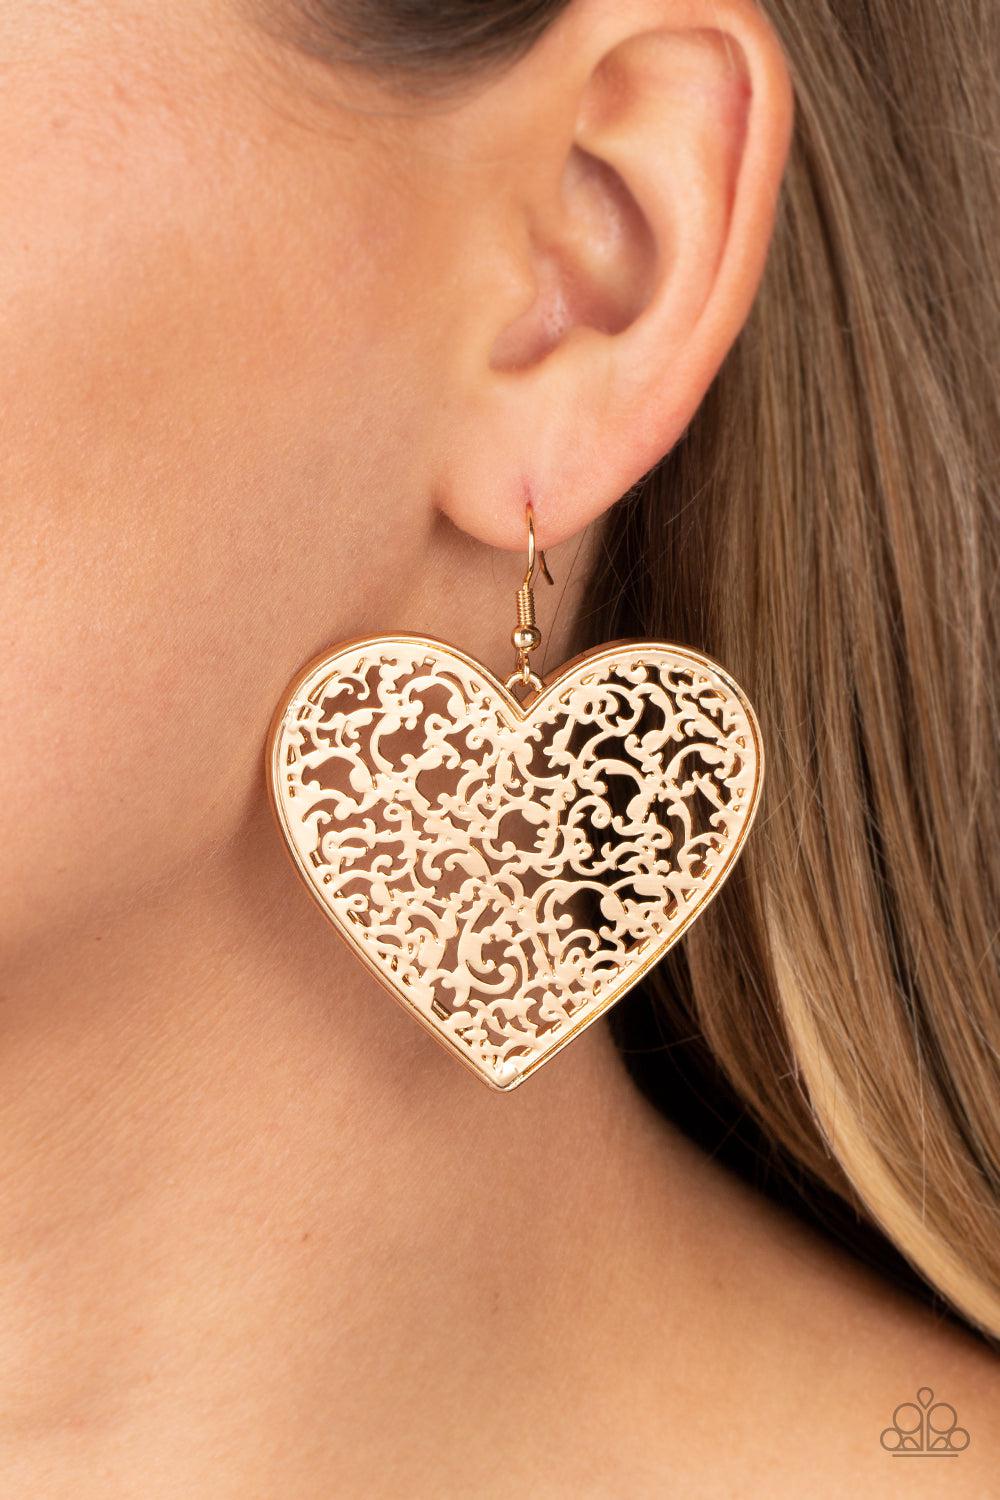 Fairest in the Land Gold Heart Earrings - Paparazzi Accessories-on model - CarasShop.com - $5 Jewelry by Cara Jewels